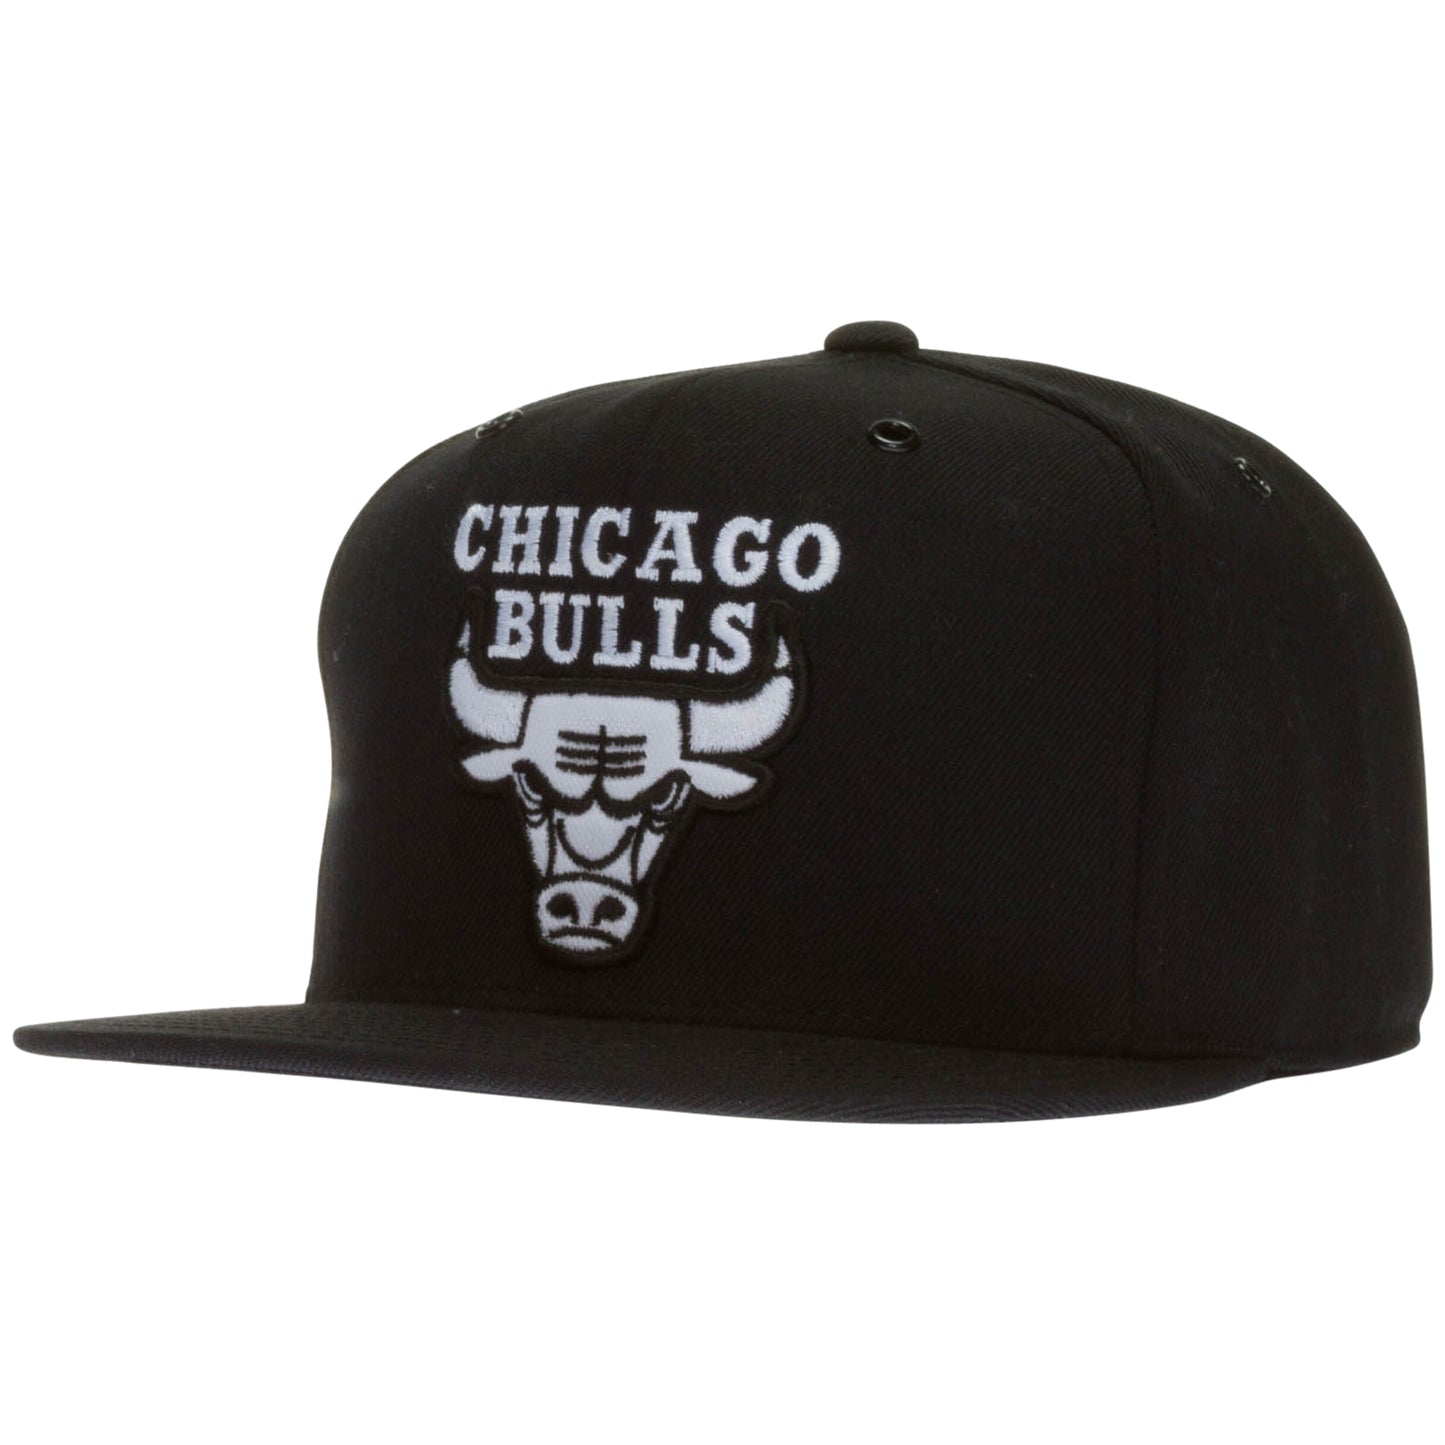 Chicago Bulls Black Primary Logo Flat Bill Fitted Hat